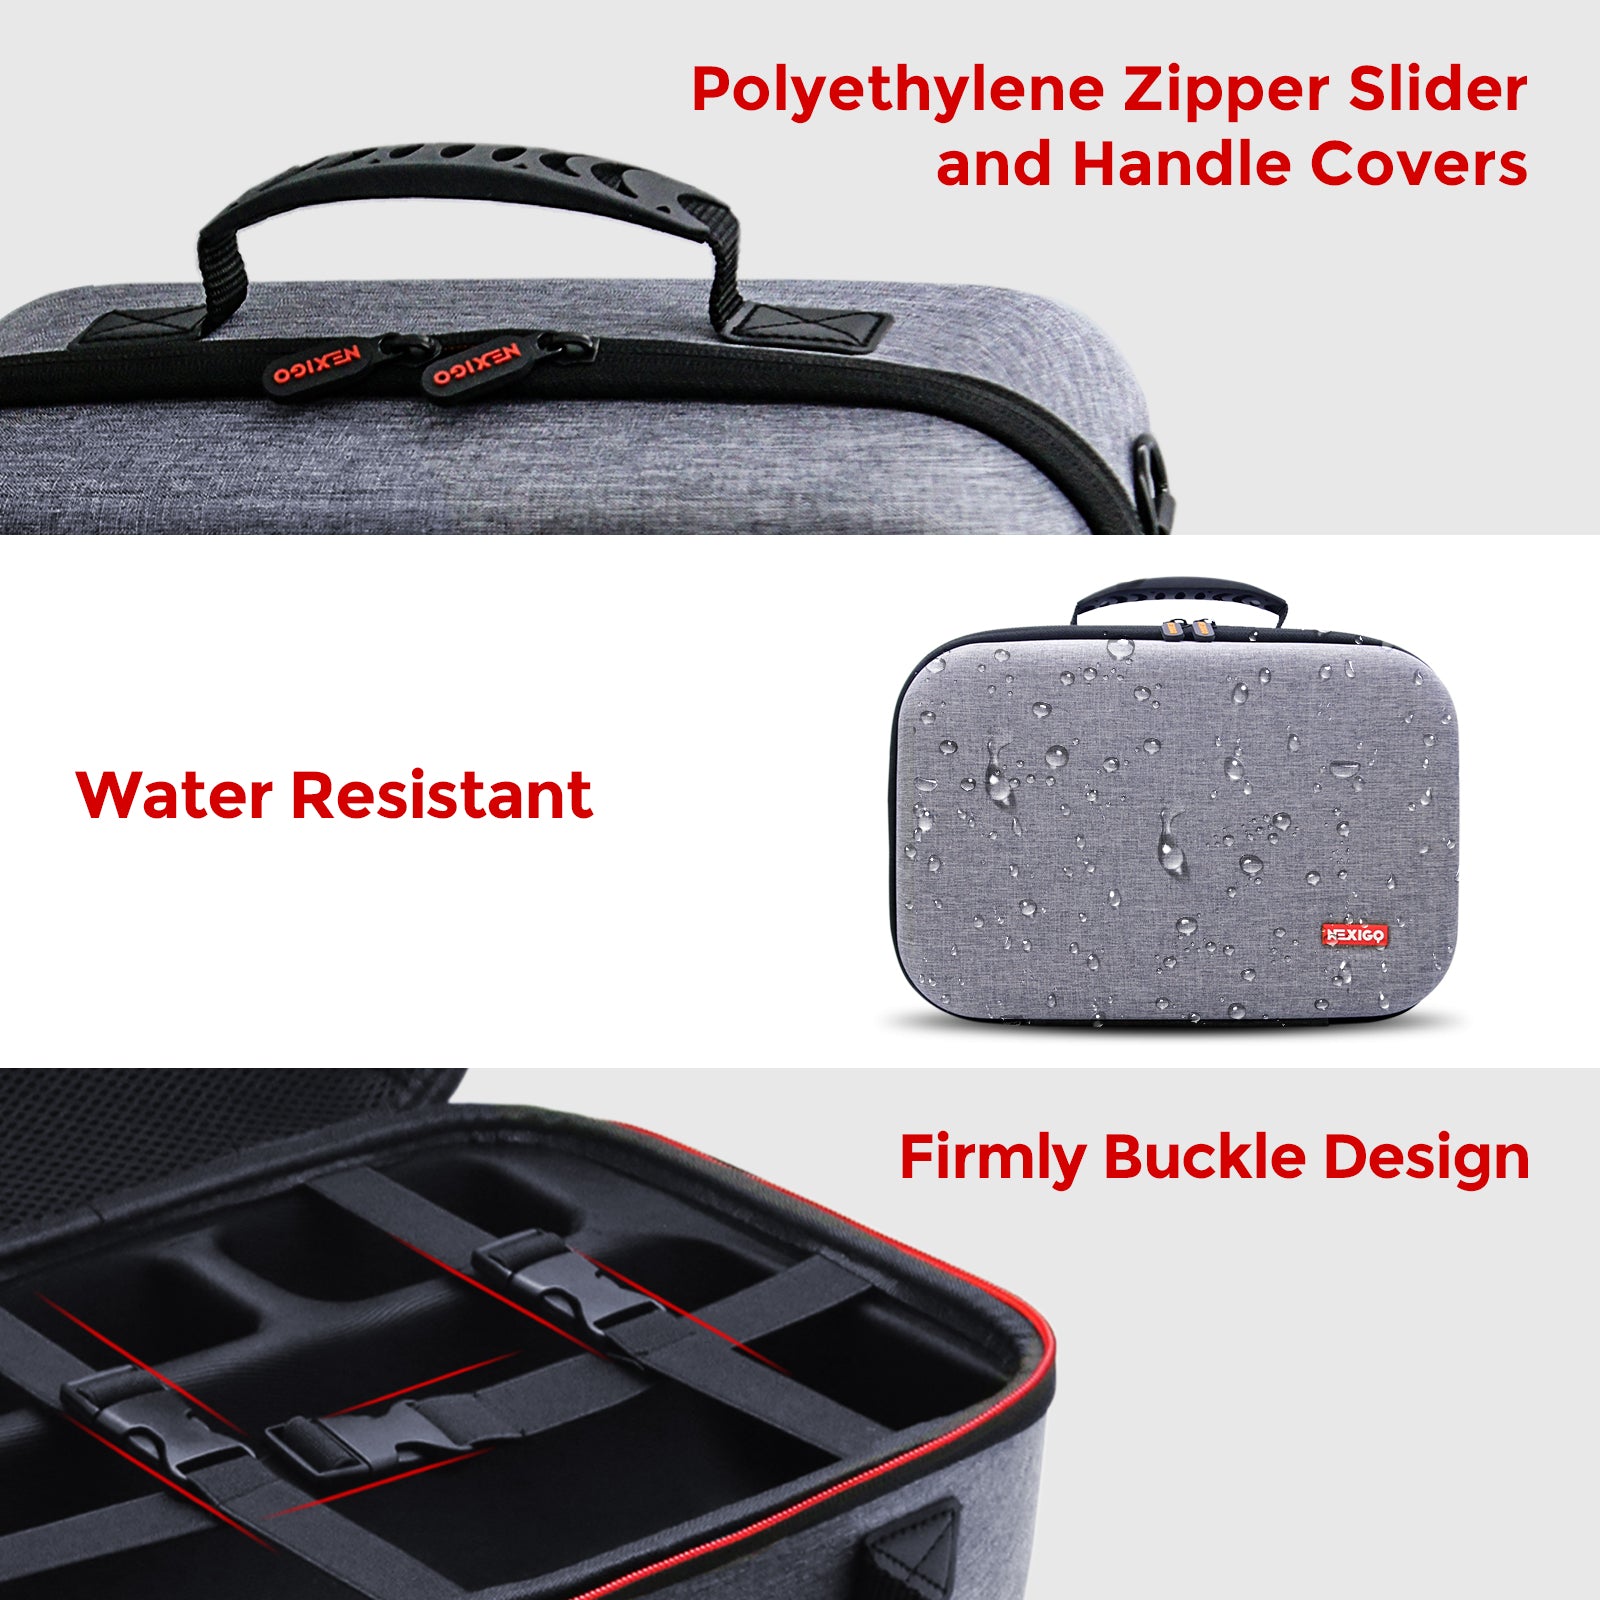 The carrying case features a polyethylene zipper slide, buckle design, handle, and is water-proof.